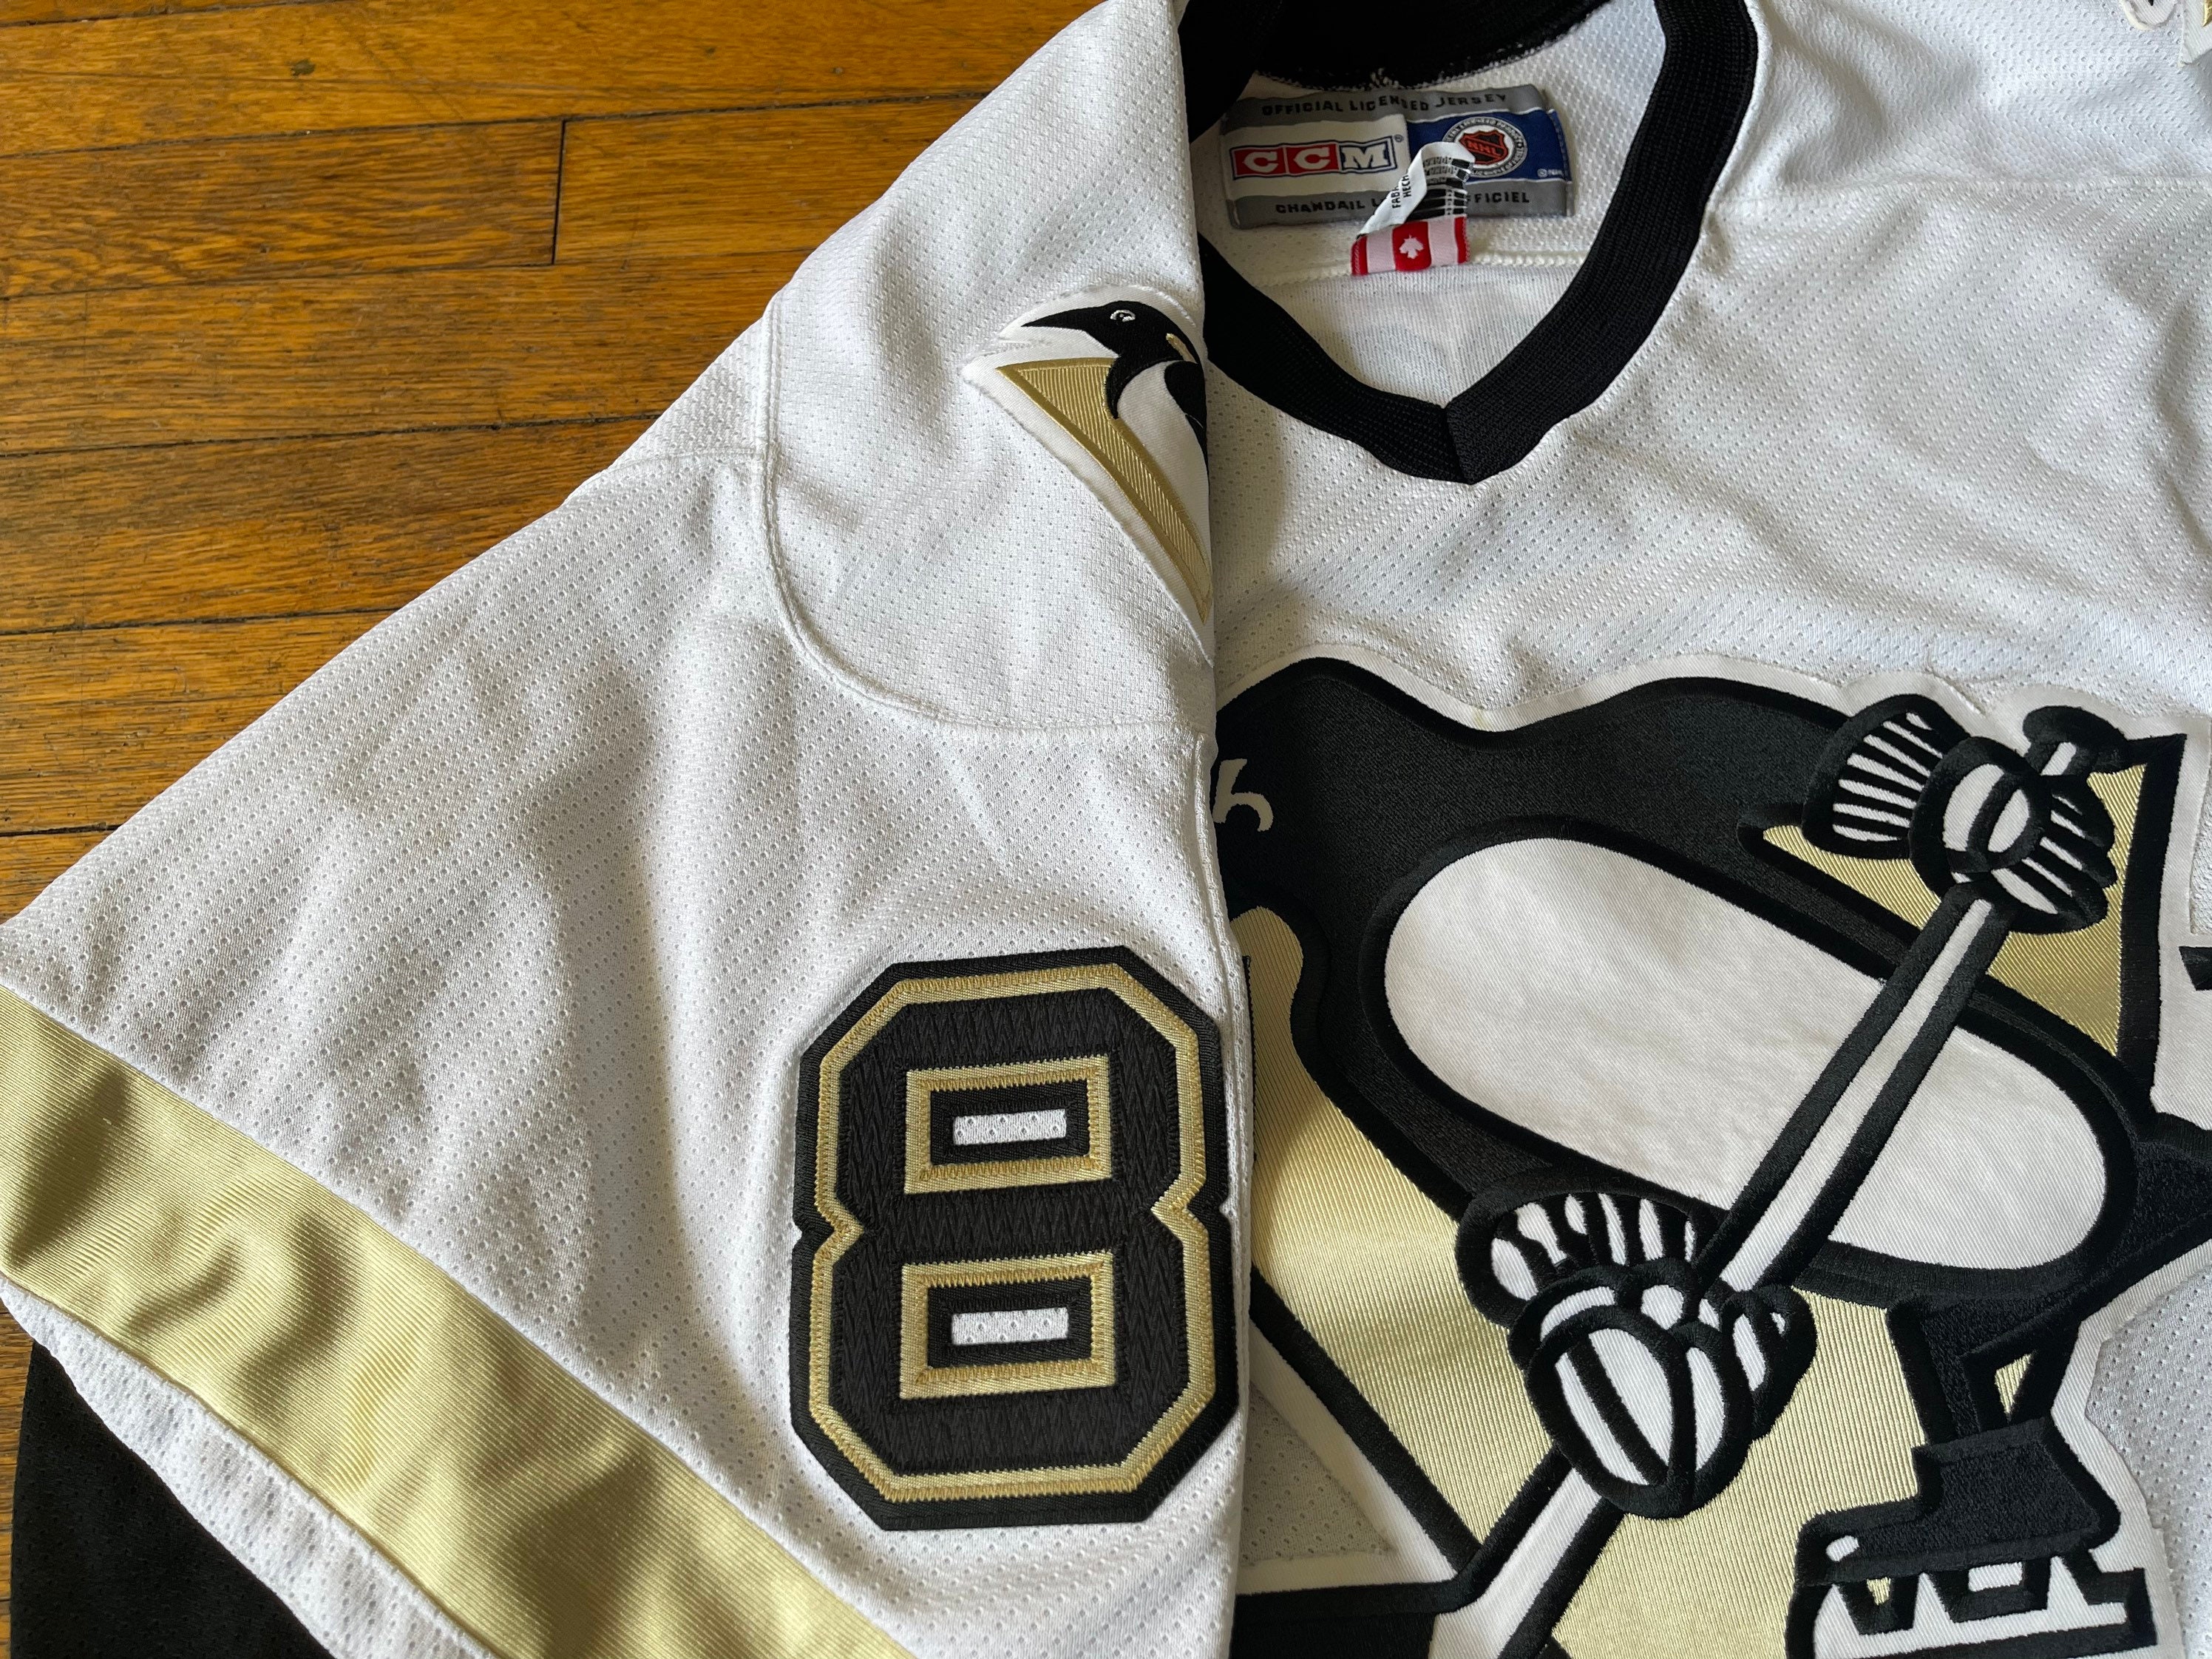 Buy NHL Pittsburgh Penguins Sidney Crosby Digital Camo Jersey, White/Black,  Medium Online at Low Prices in India 